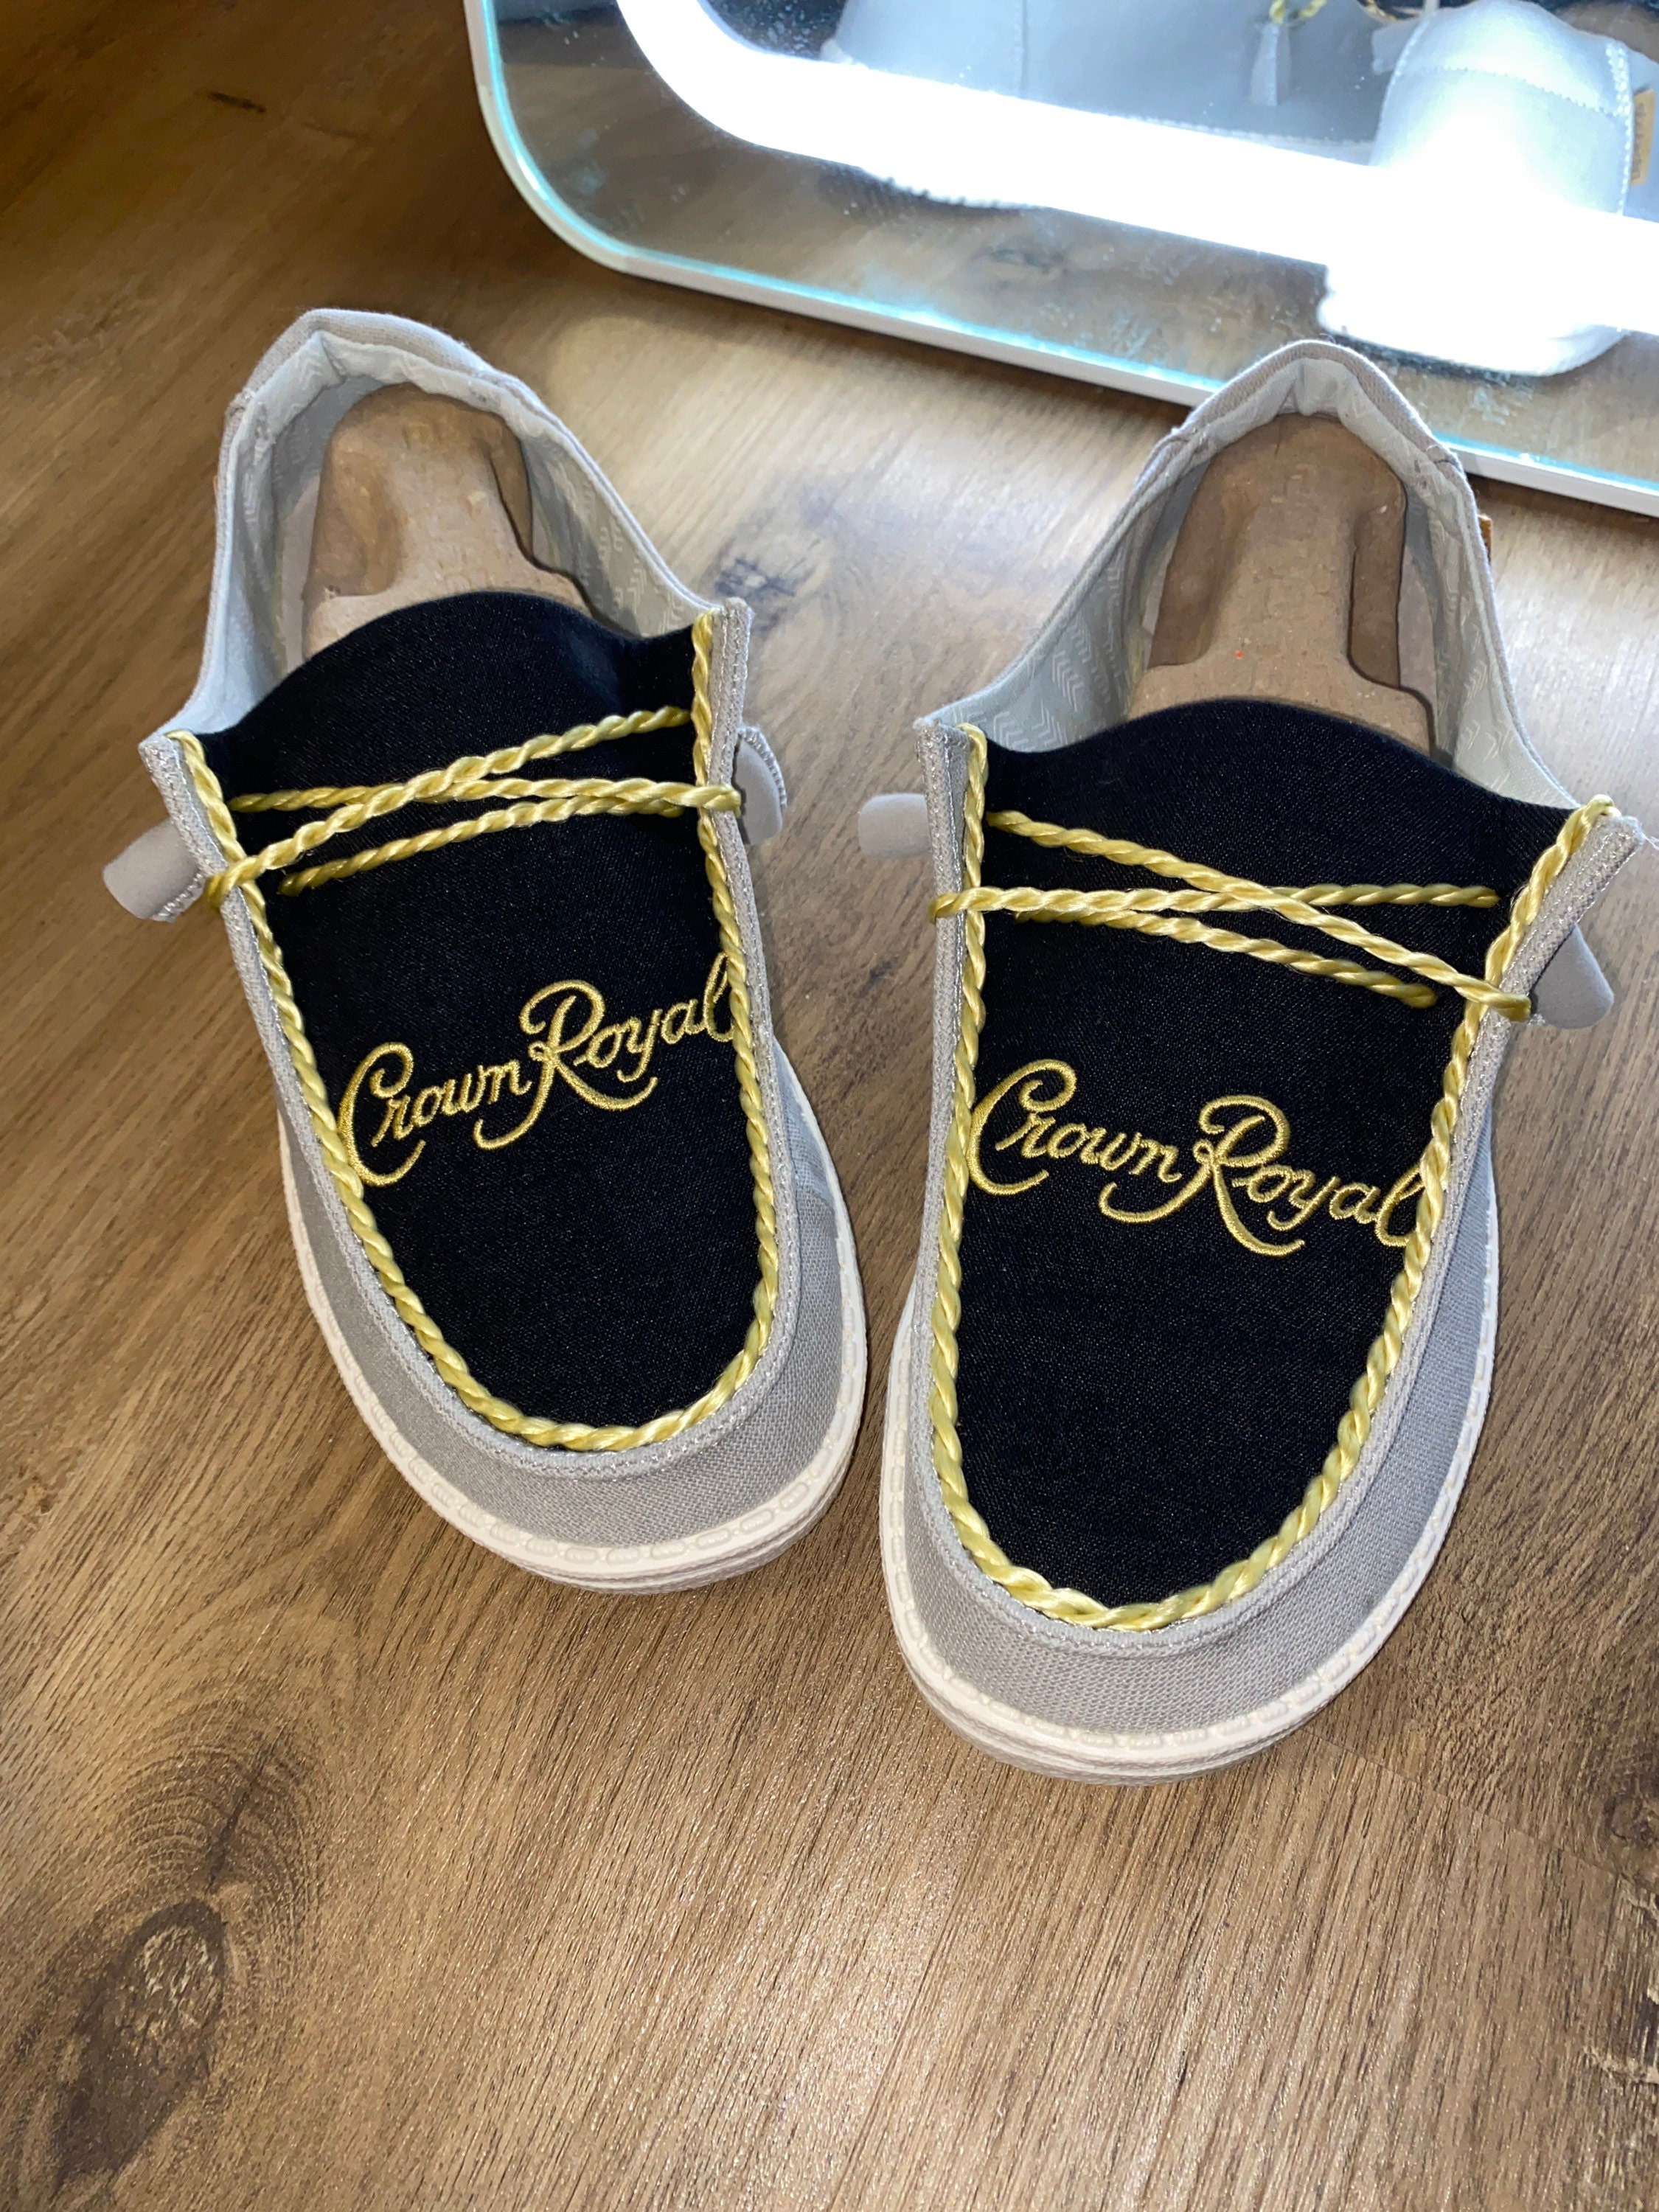 Apple Crown Royal Hey Dudes - Hey Dudes Shoes - Custom Hey Dudes - Hey  Dudes Authentic Bags